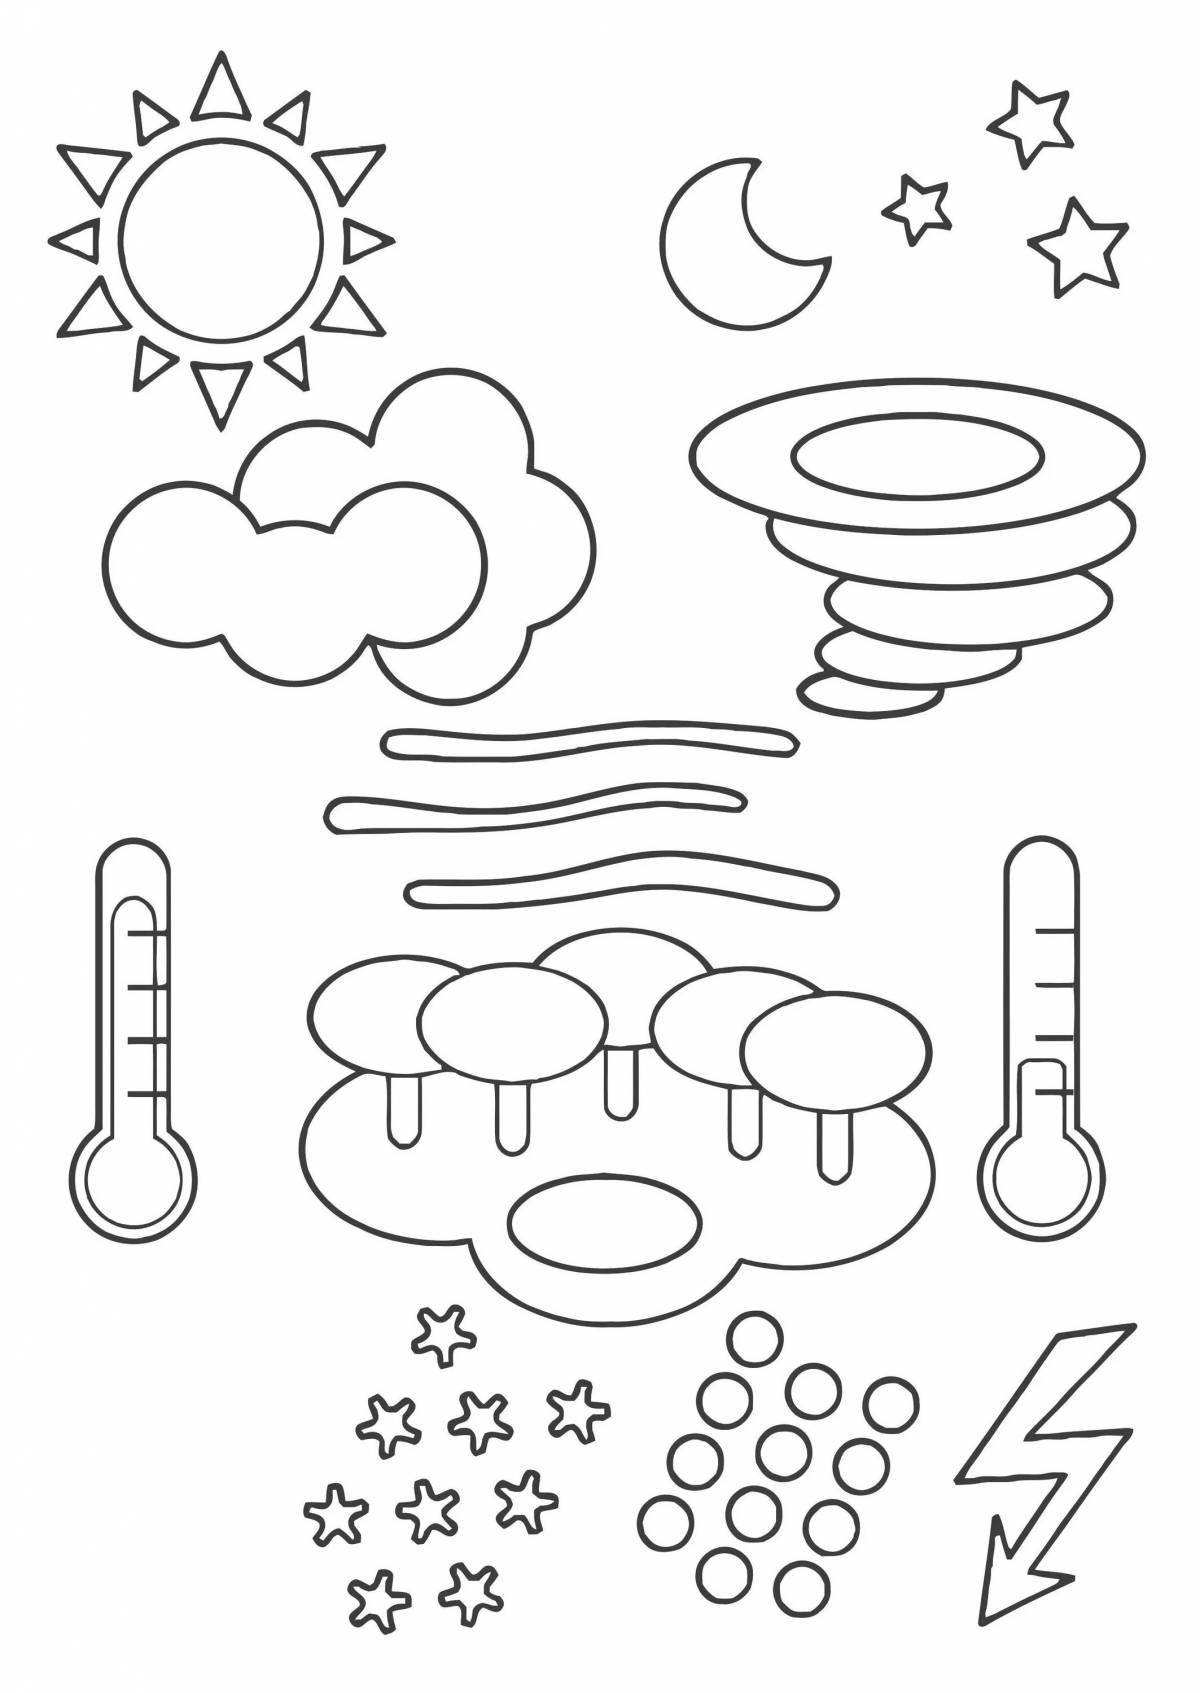 Creative weather coloring for kids